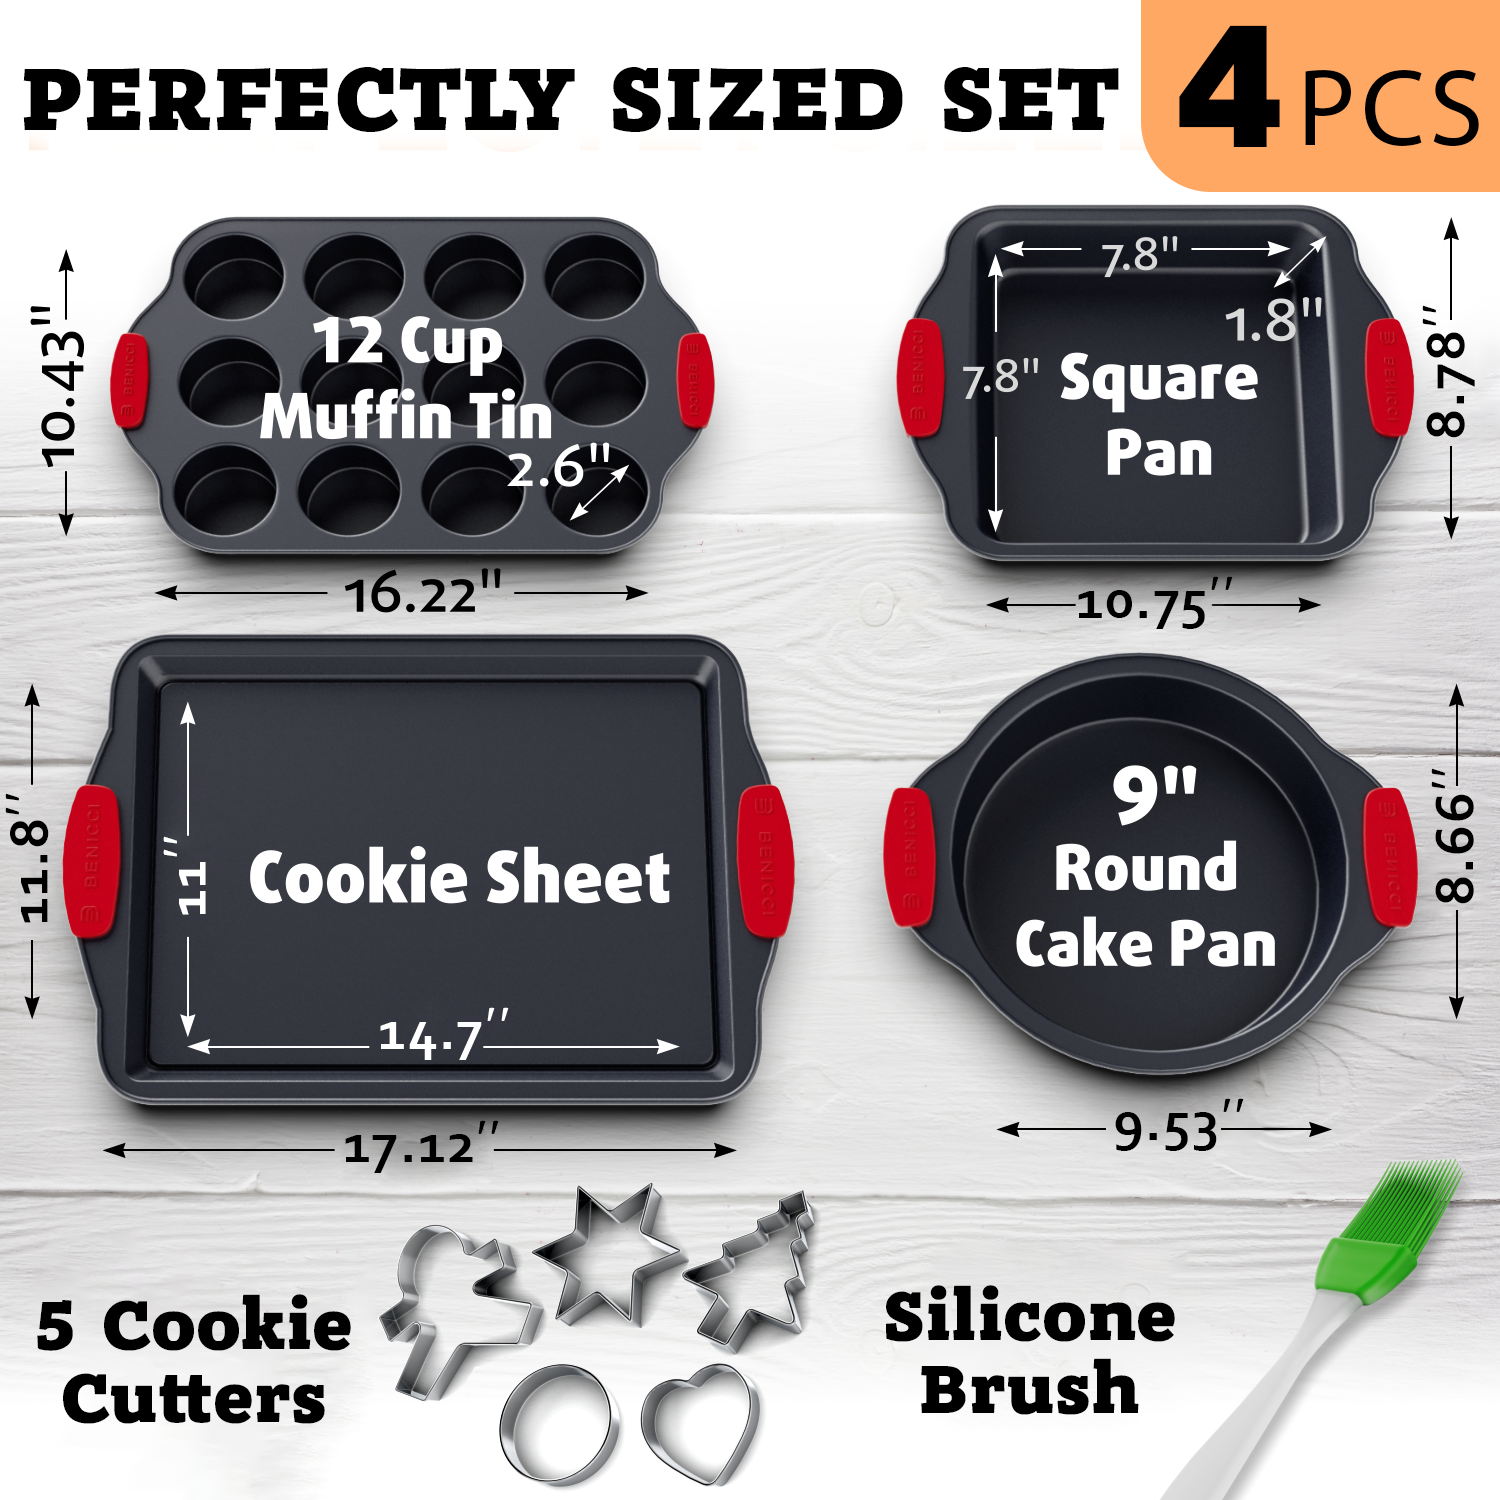 Benicci Premium Non-Stick Baking Sheets Set of 3 - Deluxe PBA Free, Easy to Clean Racks w/ Silicone Handles - Bakeware Pans for Cooking